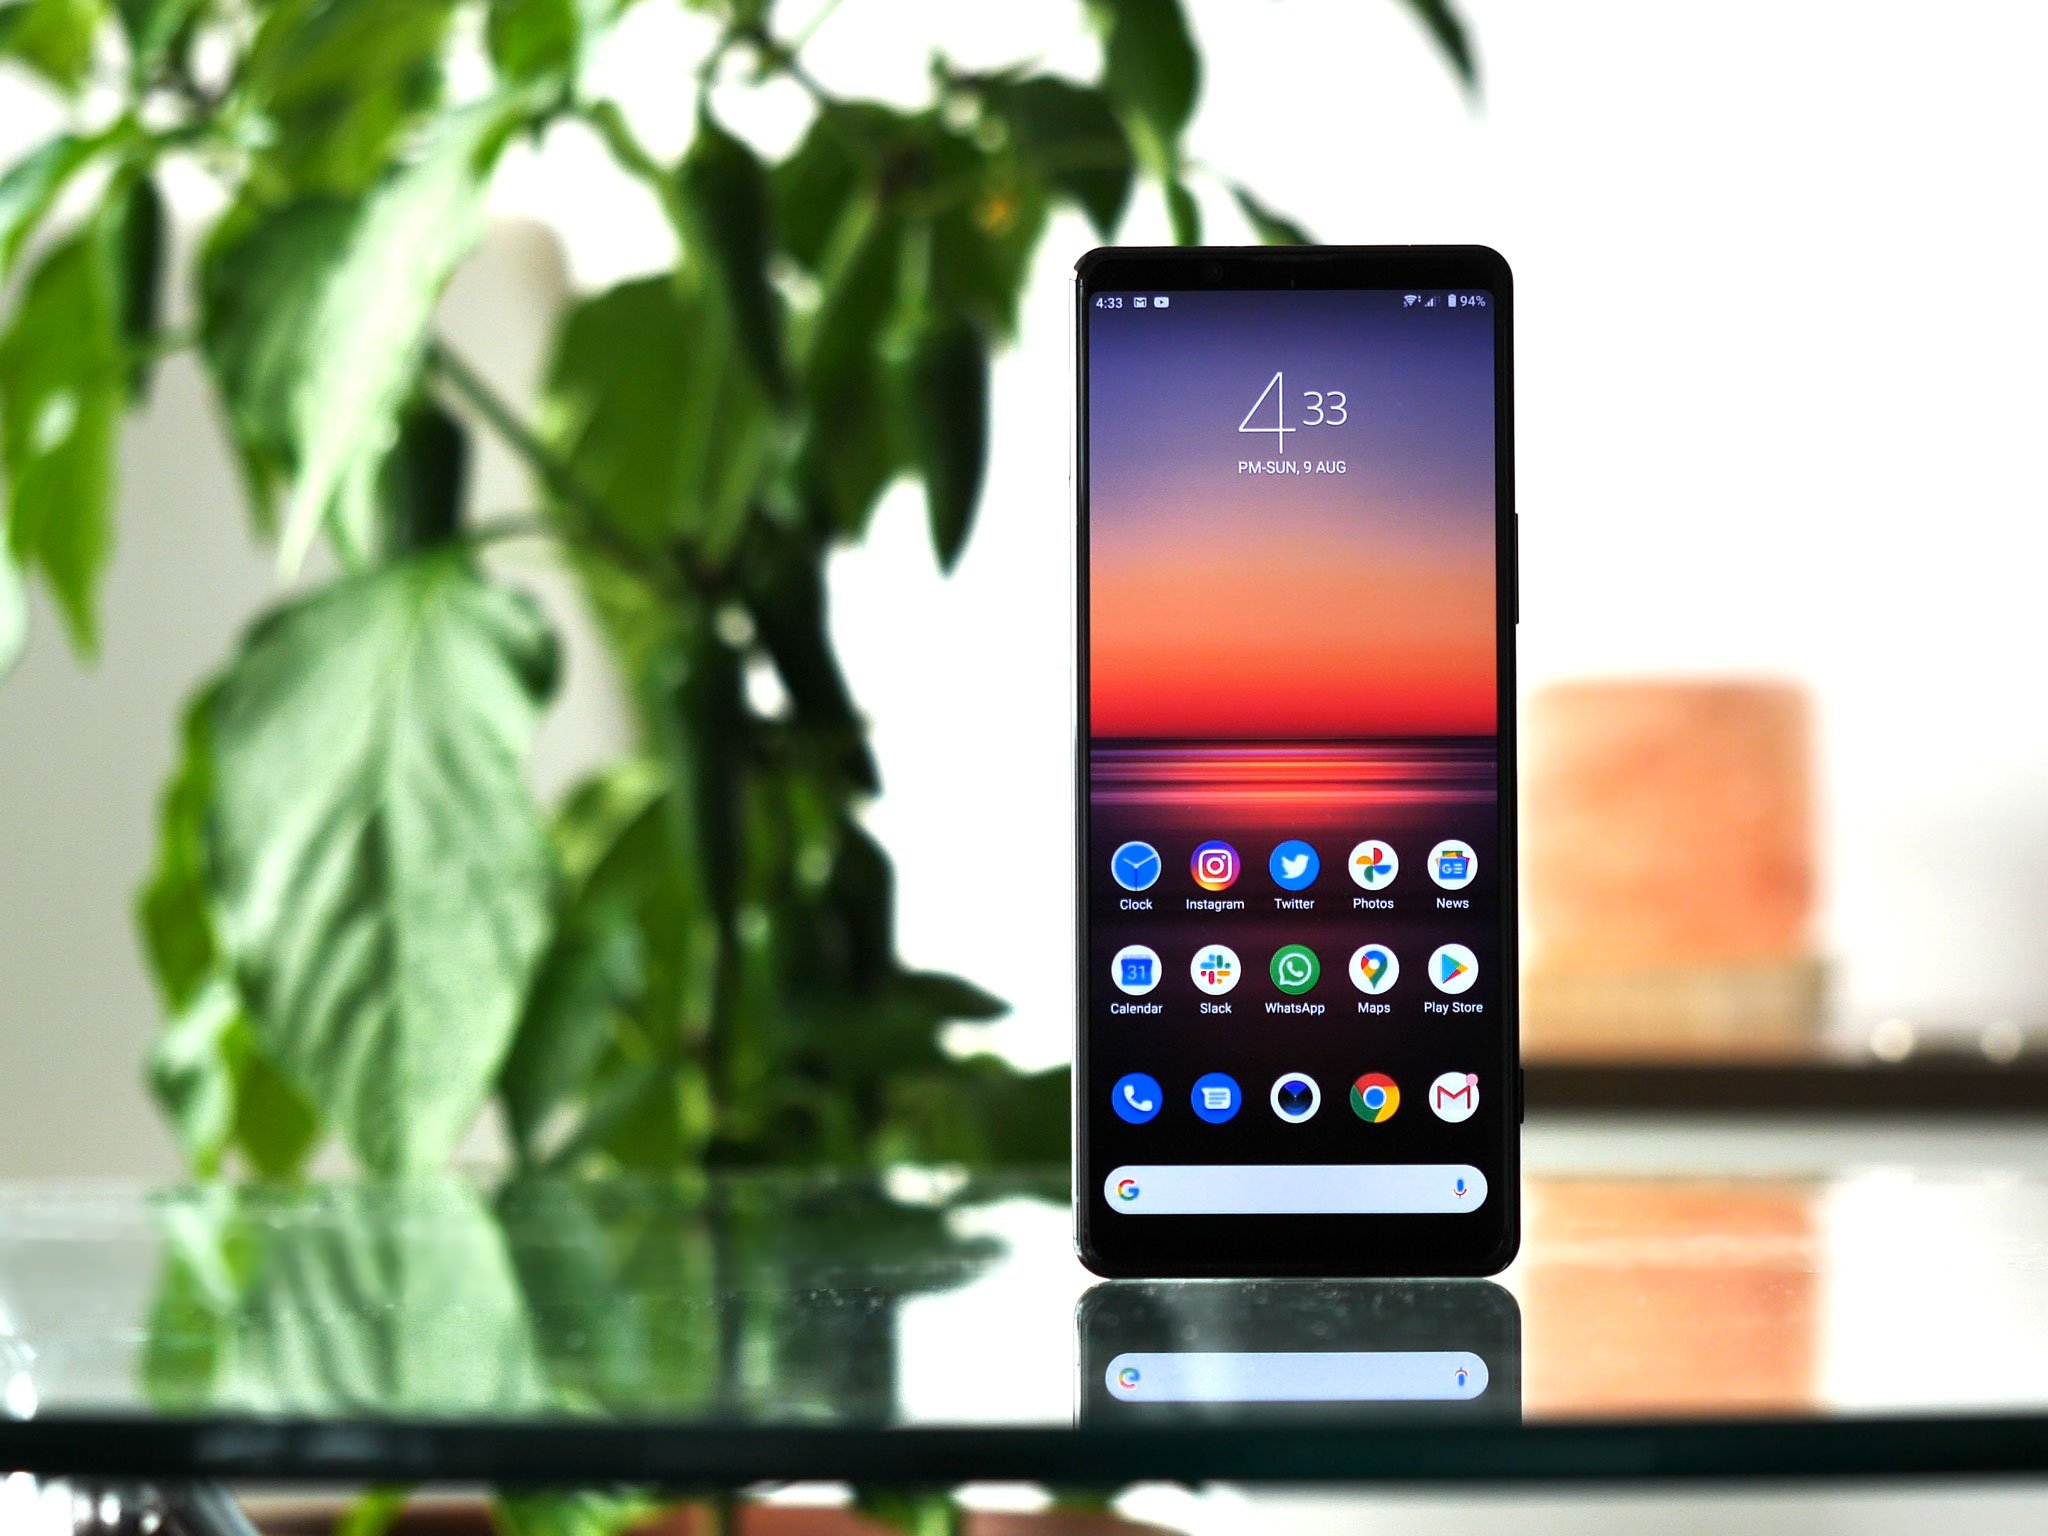 A picture of the Sony Xperia 1 V with a periscopic camera has surfaced online